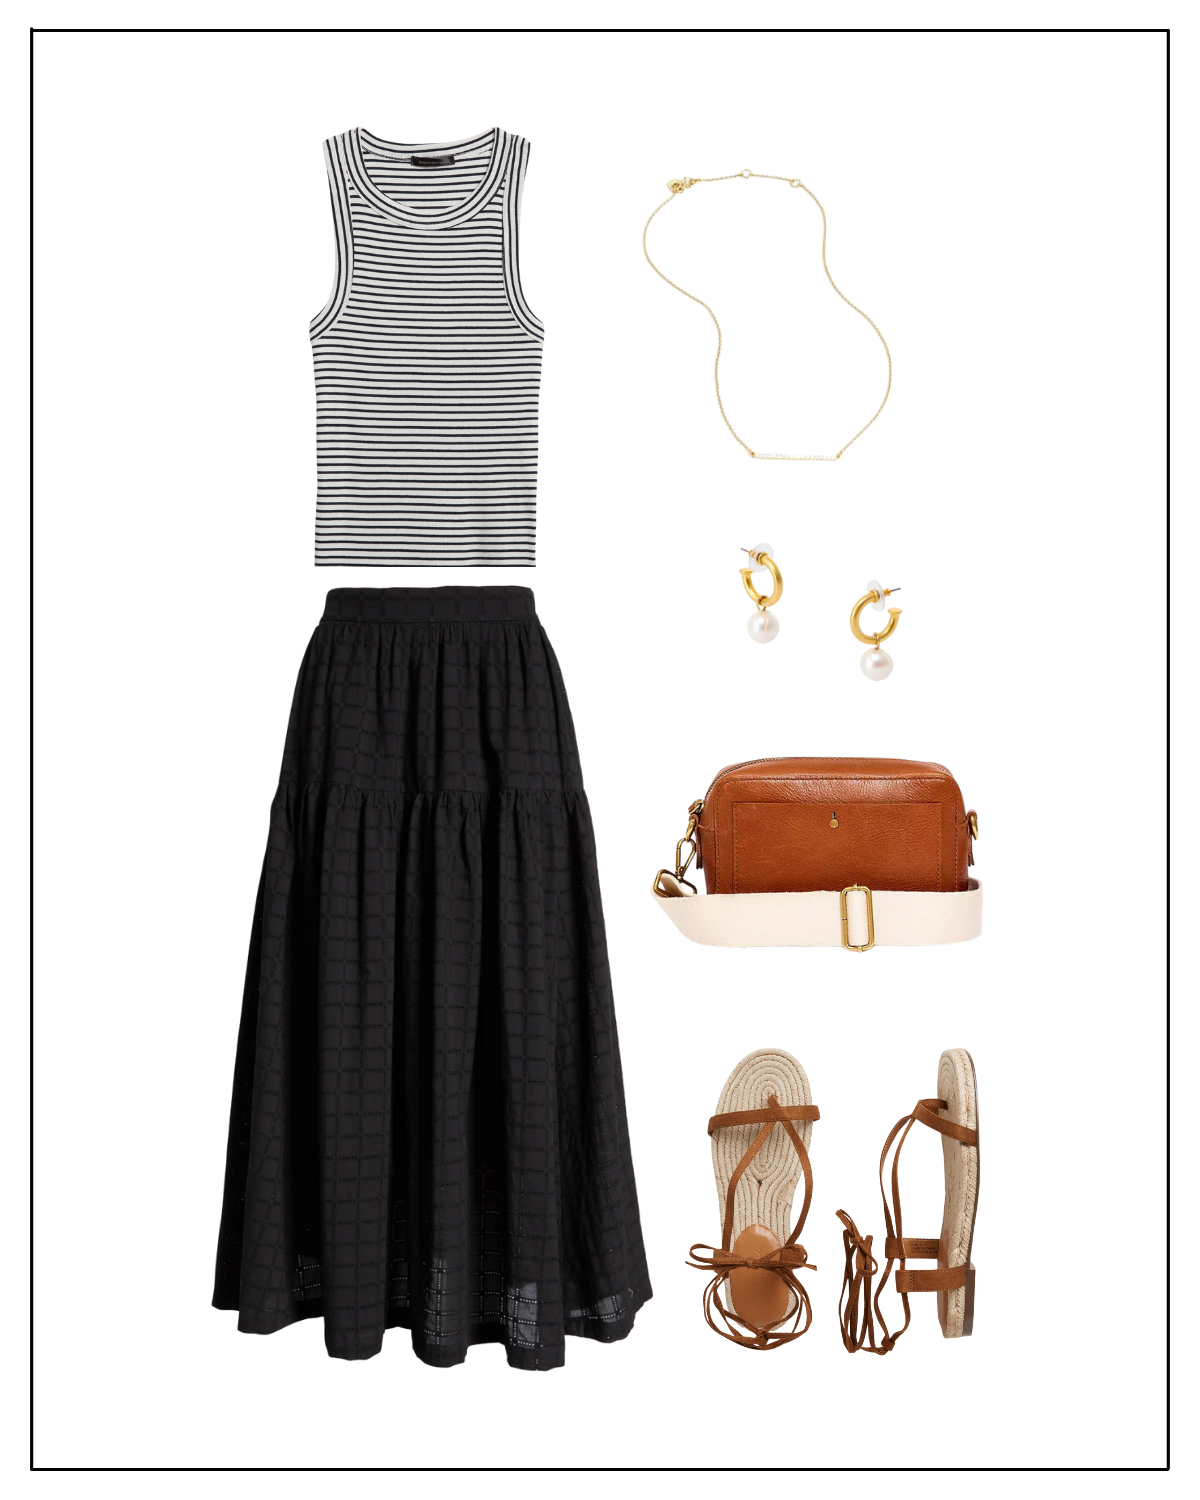 How to Style a Midi Skirt for summer vacation